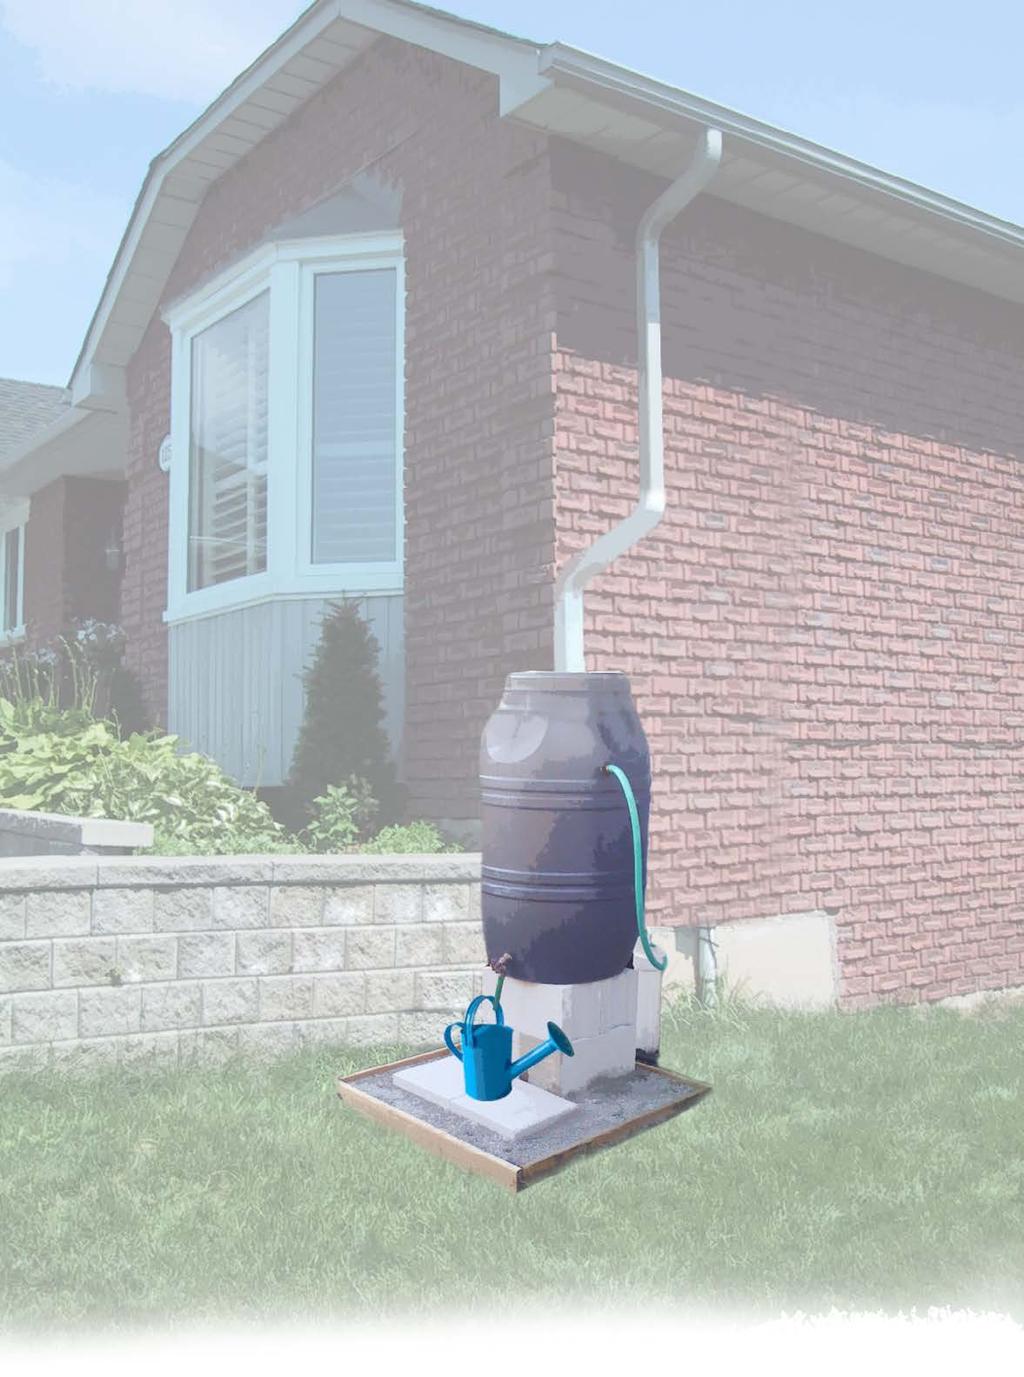 RAINWATER HARVESTING SYSTEMS Rainwater harvesting systems focus on the conservation, capture, storage and reuse of rain water. These systems are located close to residential and commercial buildings.